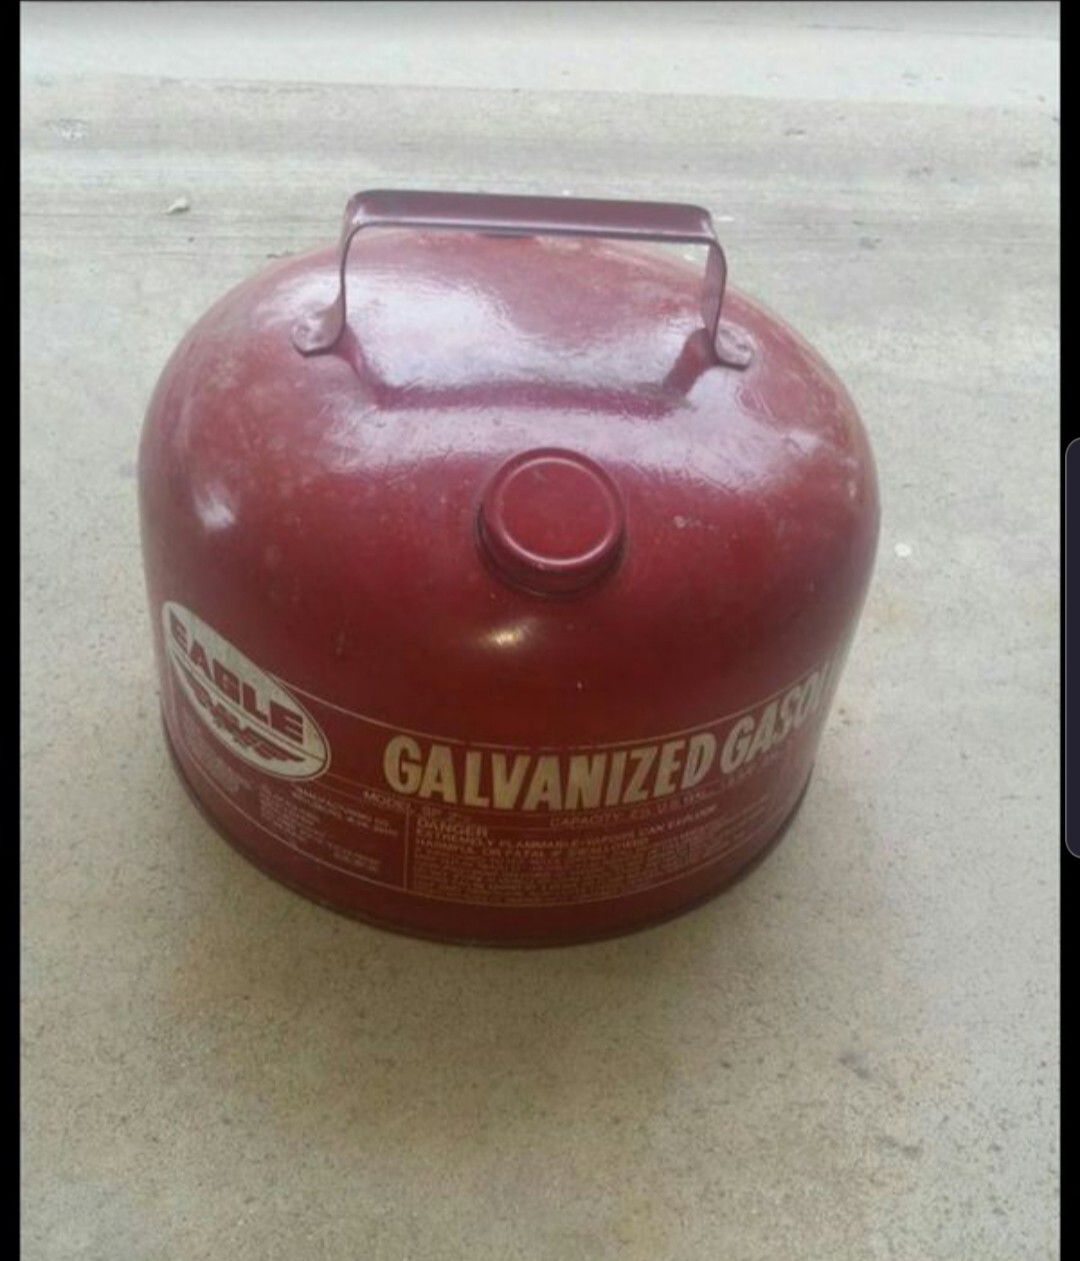 Buy this vintage 2 gallon gallon galvanized gas can perfect for small boat. Fishing season is here.